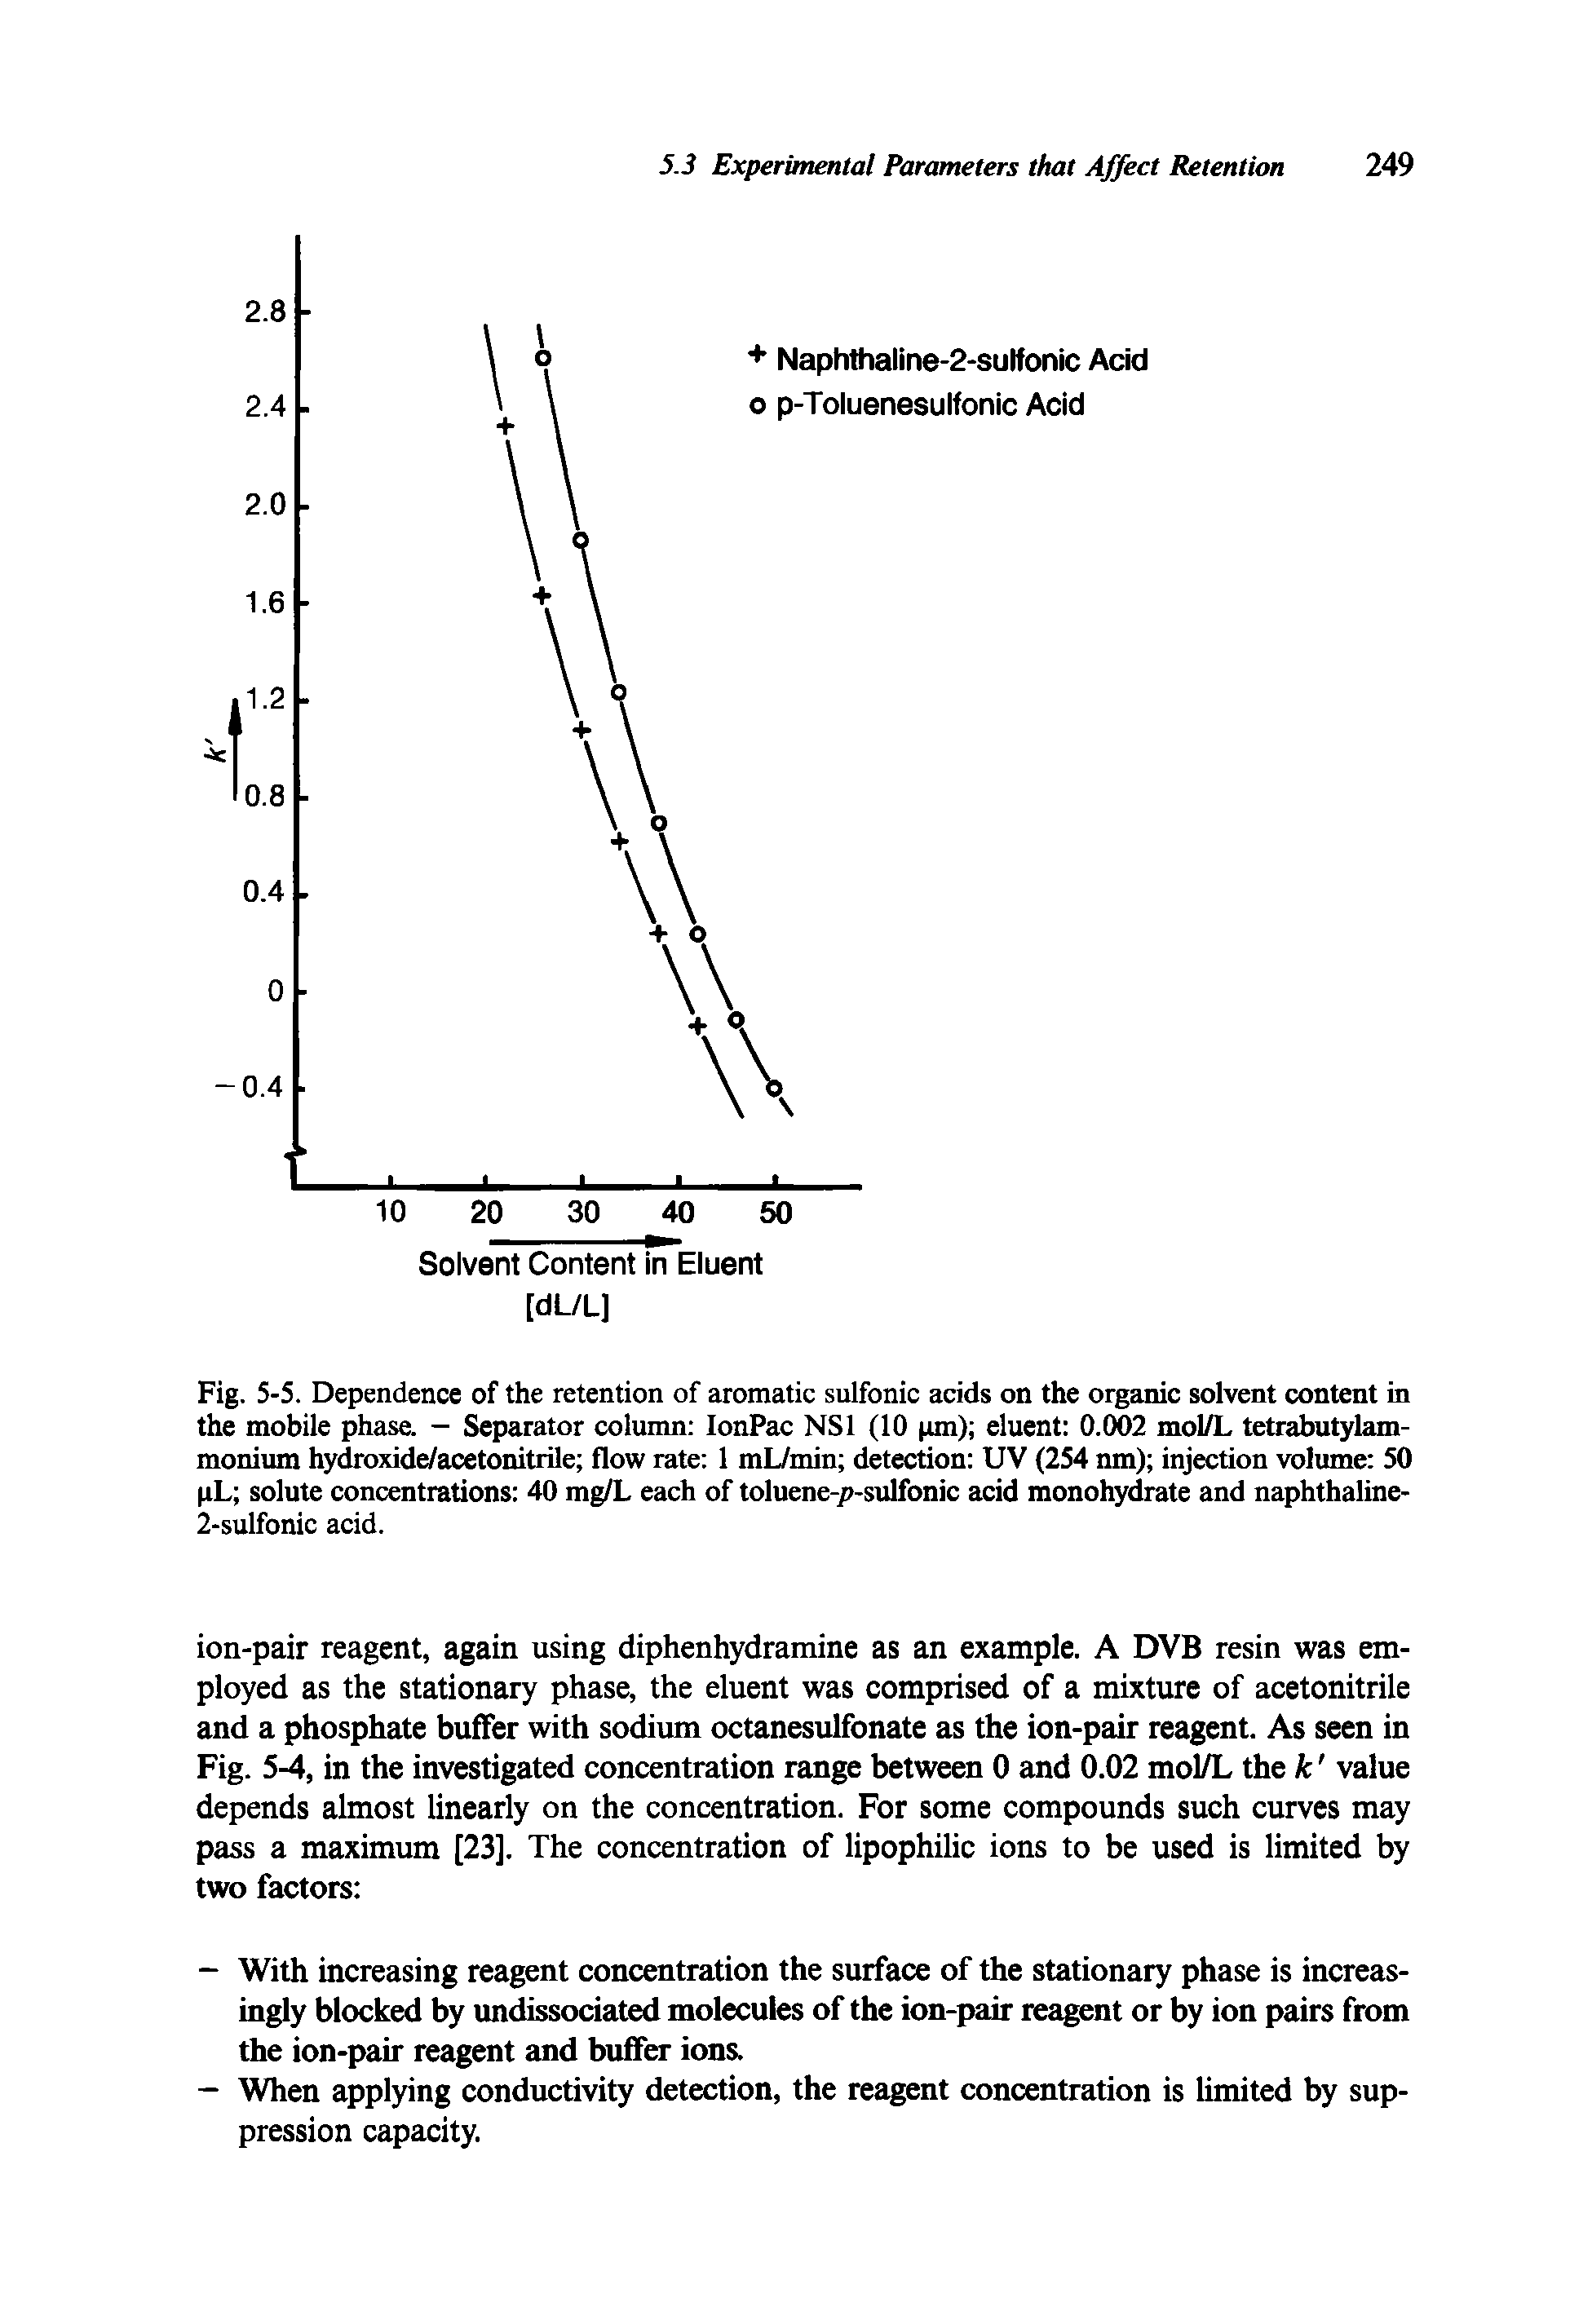 Fig. 5-5. Dependence of the retention of aromatic sulfonic acids on the organic solvent content in the mobile phase. - Separator column IonPac NS1 (10 pm) eluent 0.002 mol/L tetrabutylam-monium hydroxide/acetonitrile flow rate 1 mL/min detection UV (254 nm) injection volume 50 pL solute concentrations 40 mg/L each of toluene-p-sulfonic acid monohydrate and naphthaline-2-sulfonic acid.